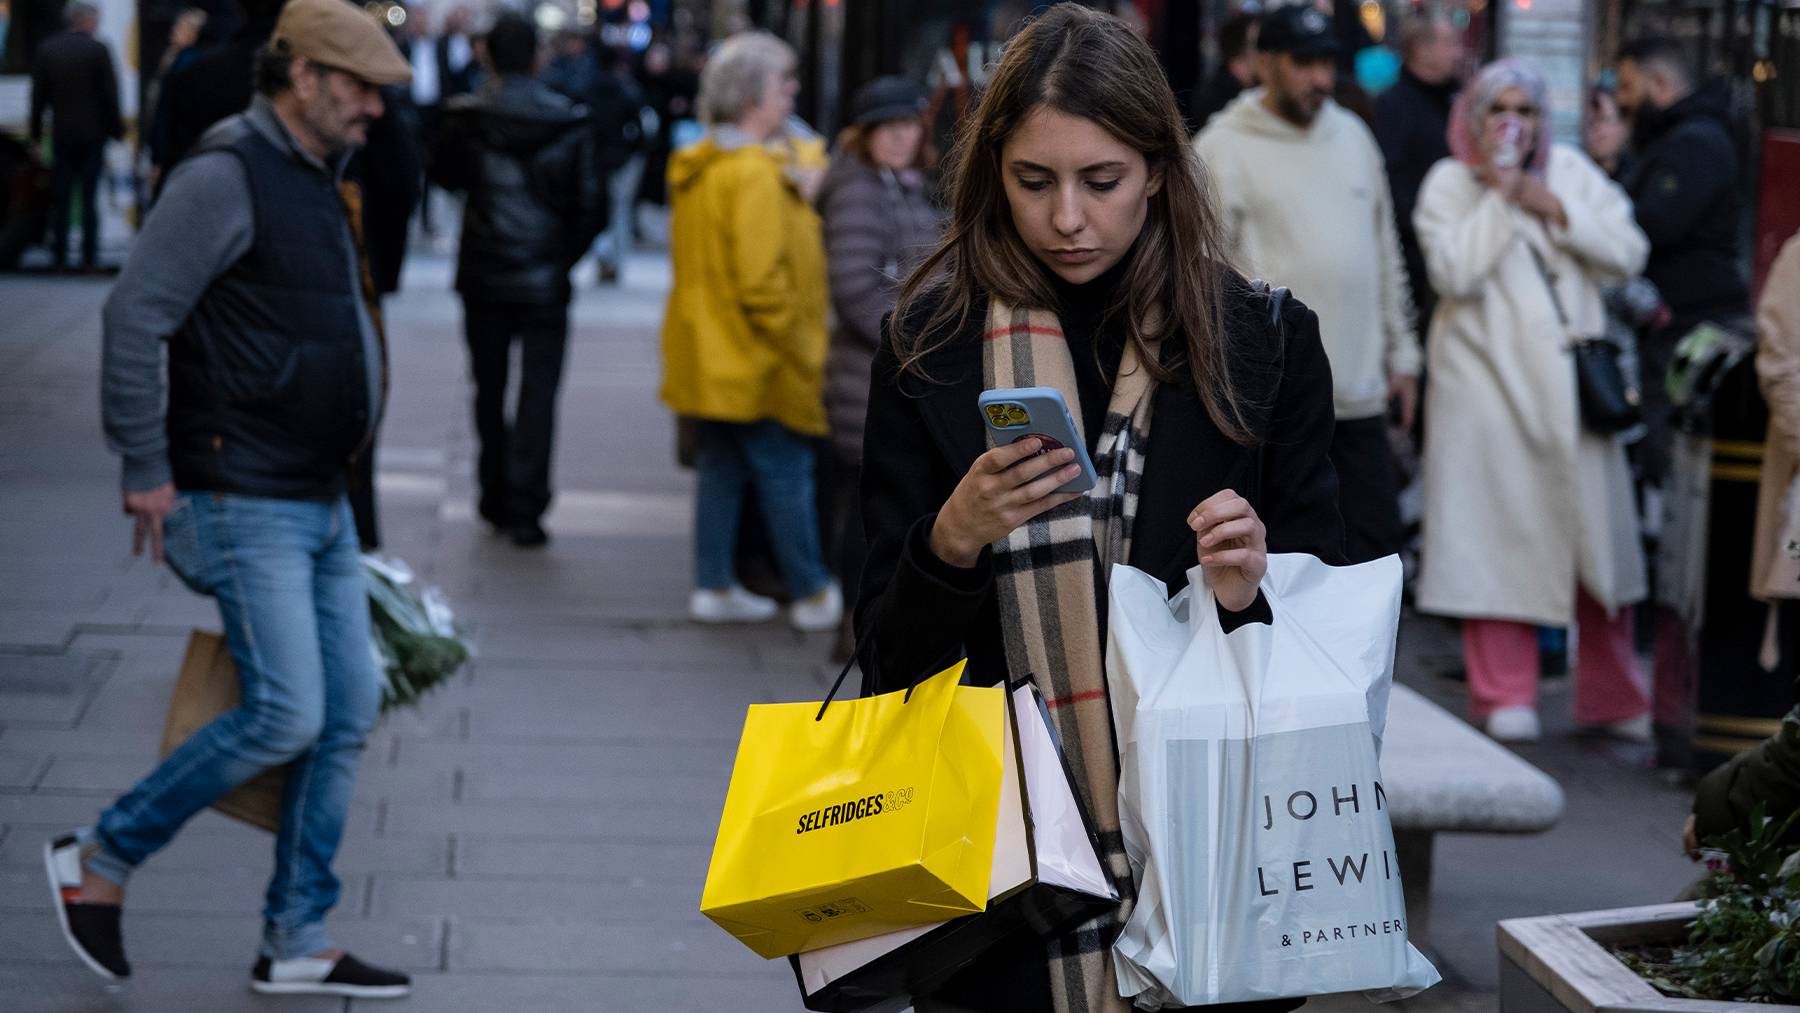 A shopper carrying Selfridges and John Lewis shopping bags, while looking at their mobile phone.